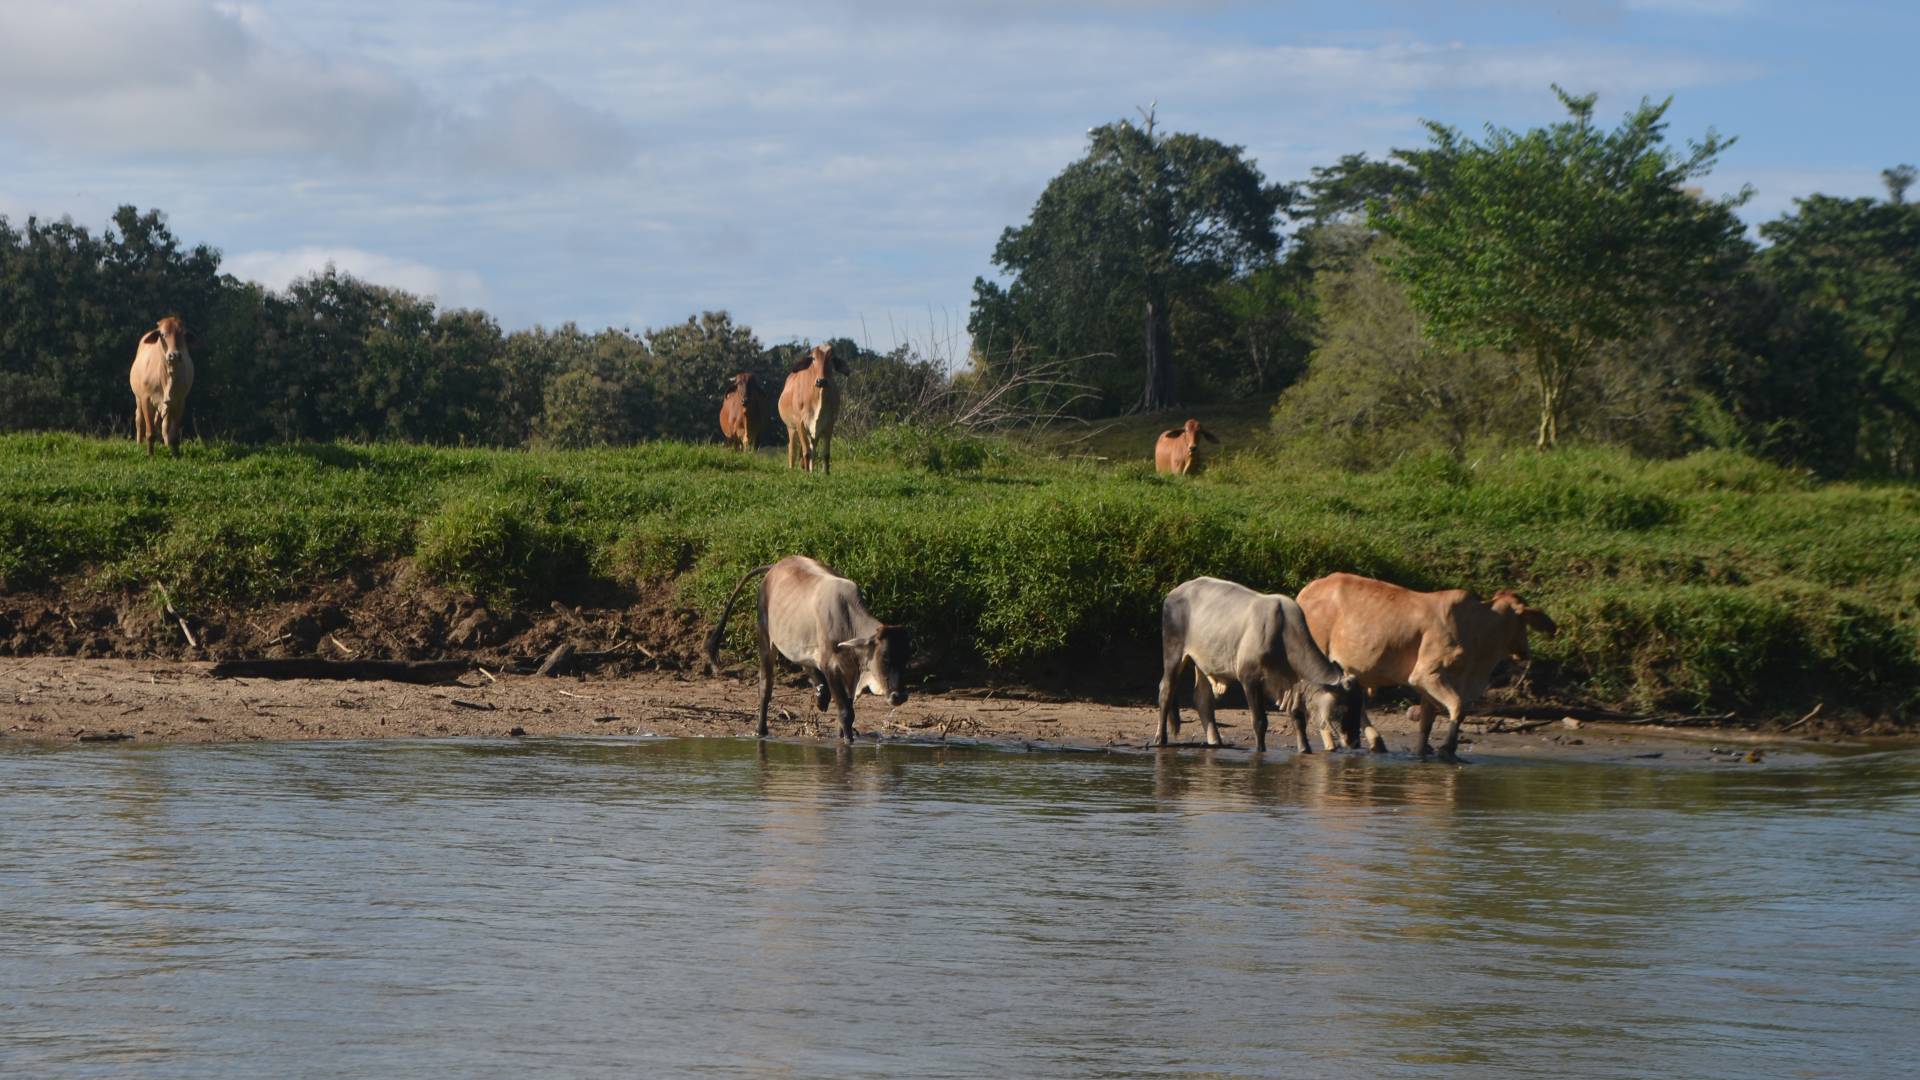 Cows standing along shoreline and in river drinking